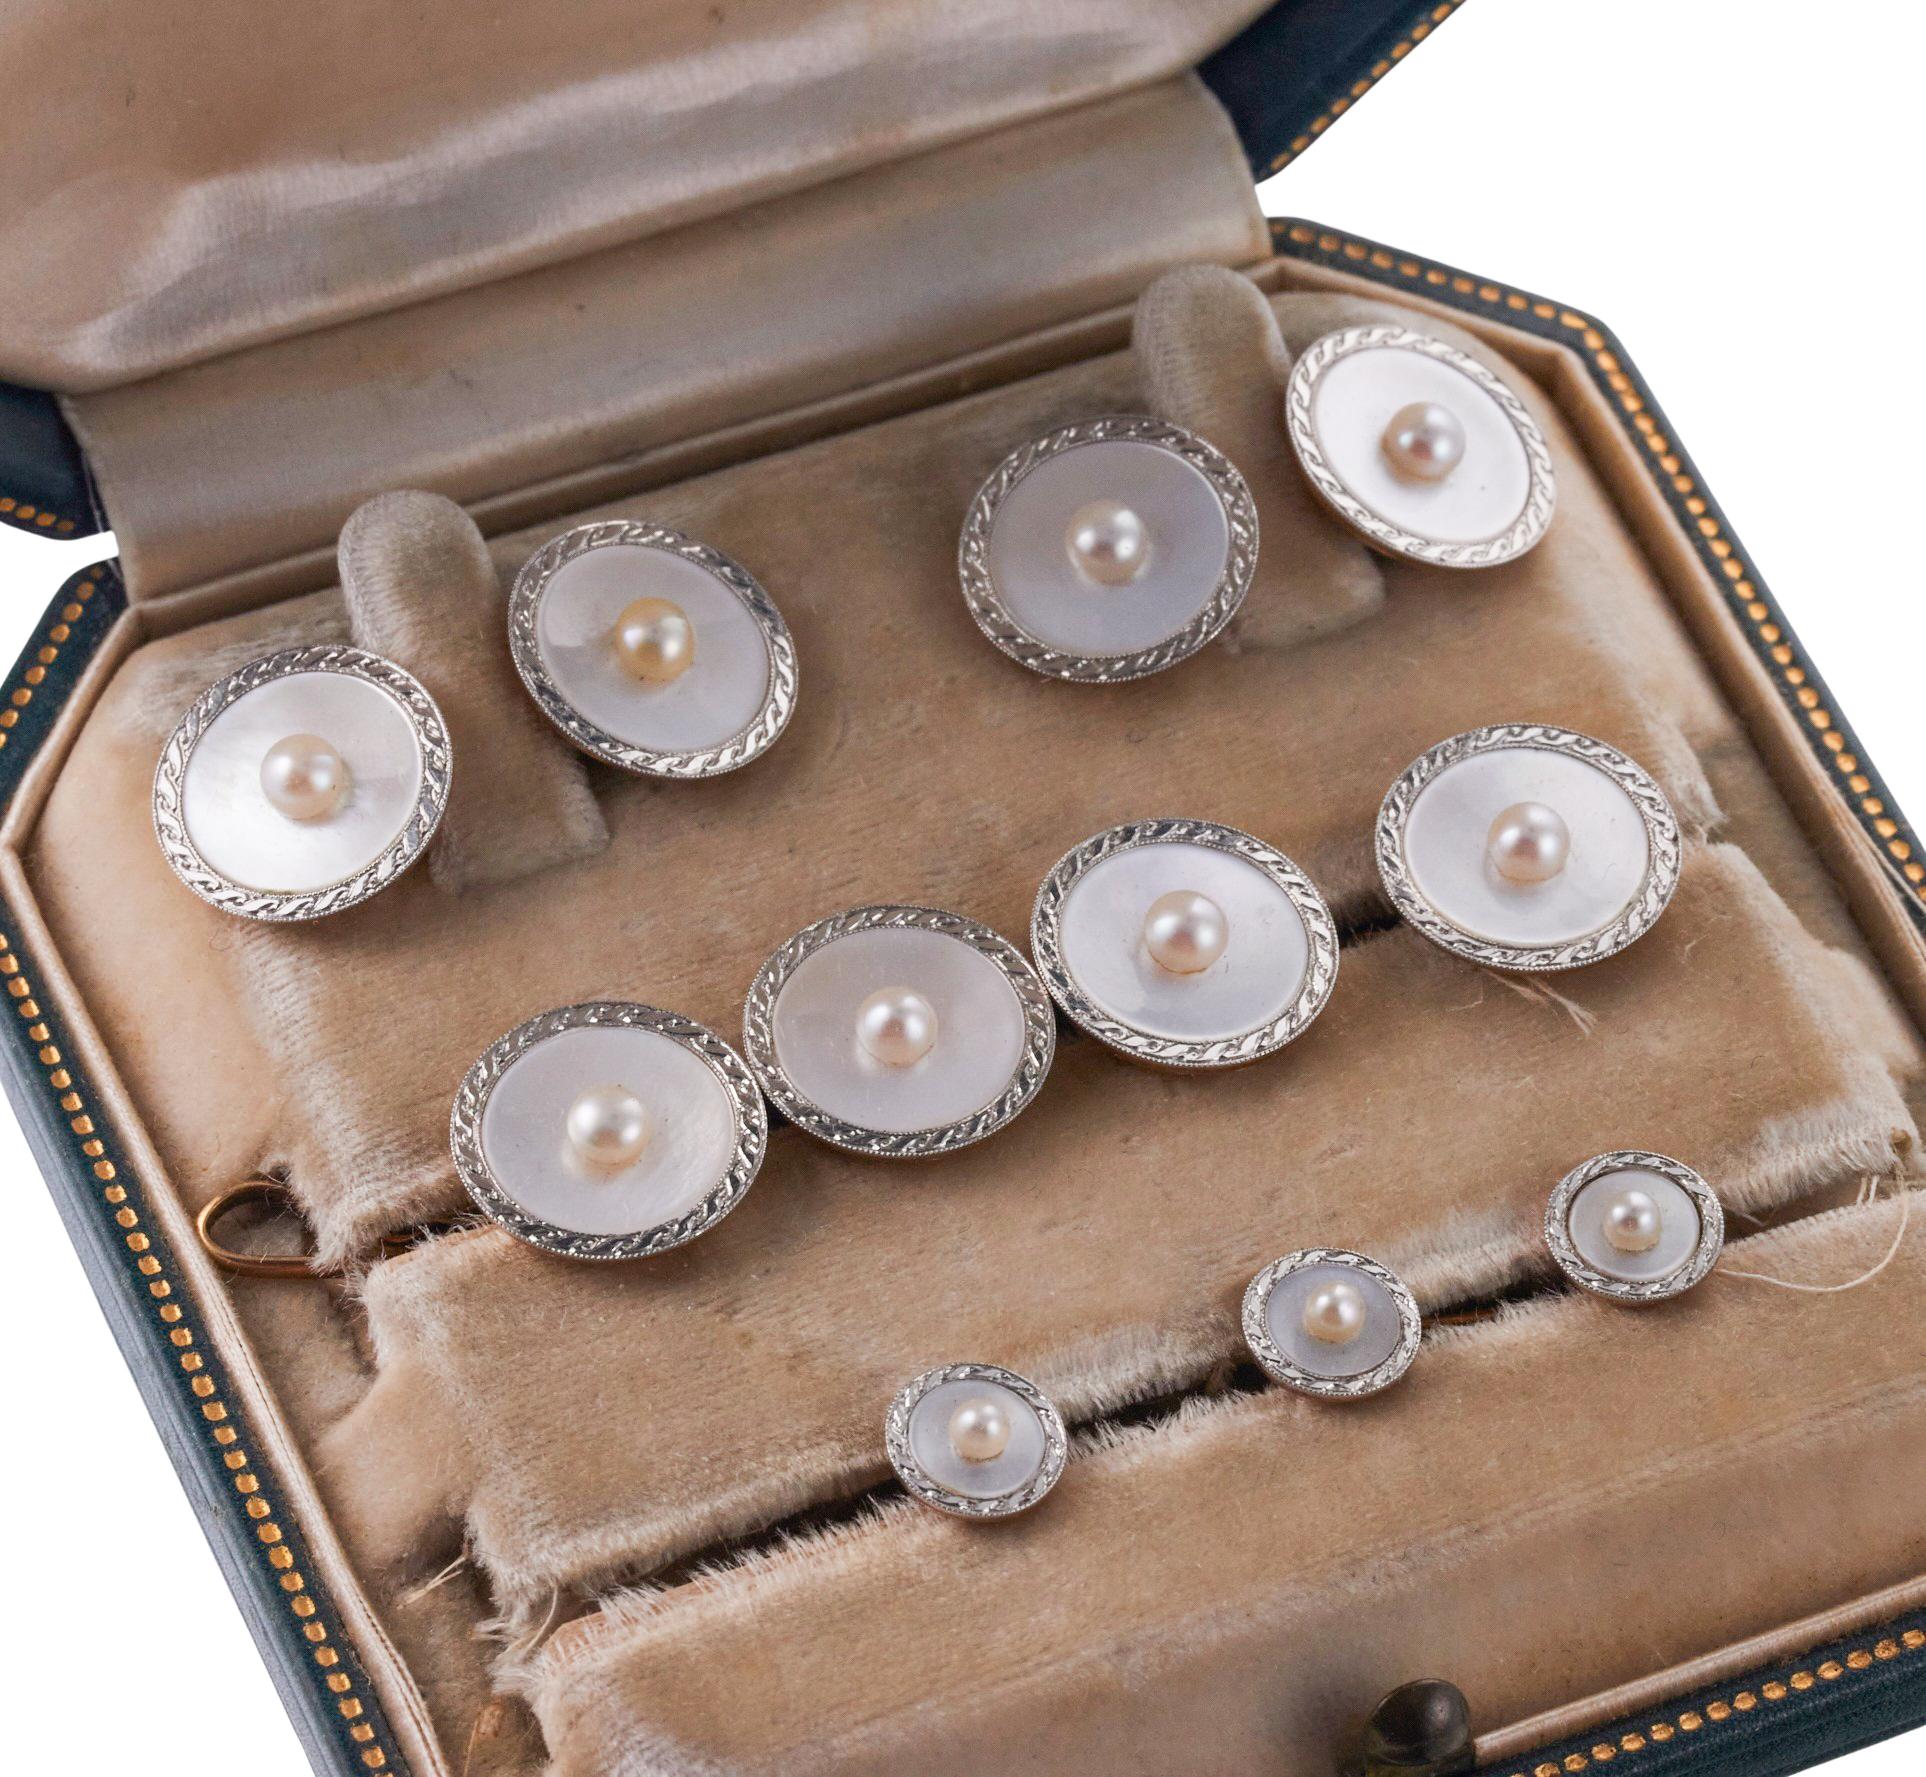 Classic Art Deco cufflinks & studs set, retailed by Raymond Yard, set in 14k gold with platinum top, decorated with pearl in the center, and mother of pearl top. Cufflink top is 9/16